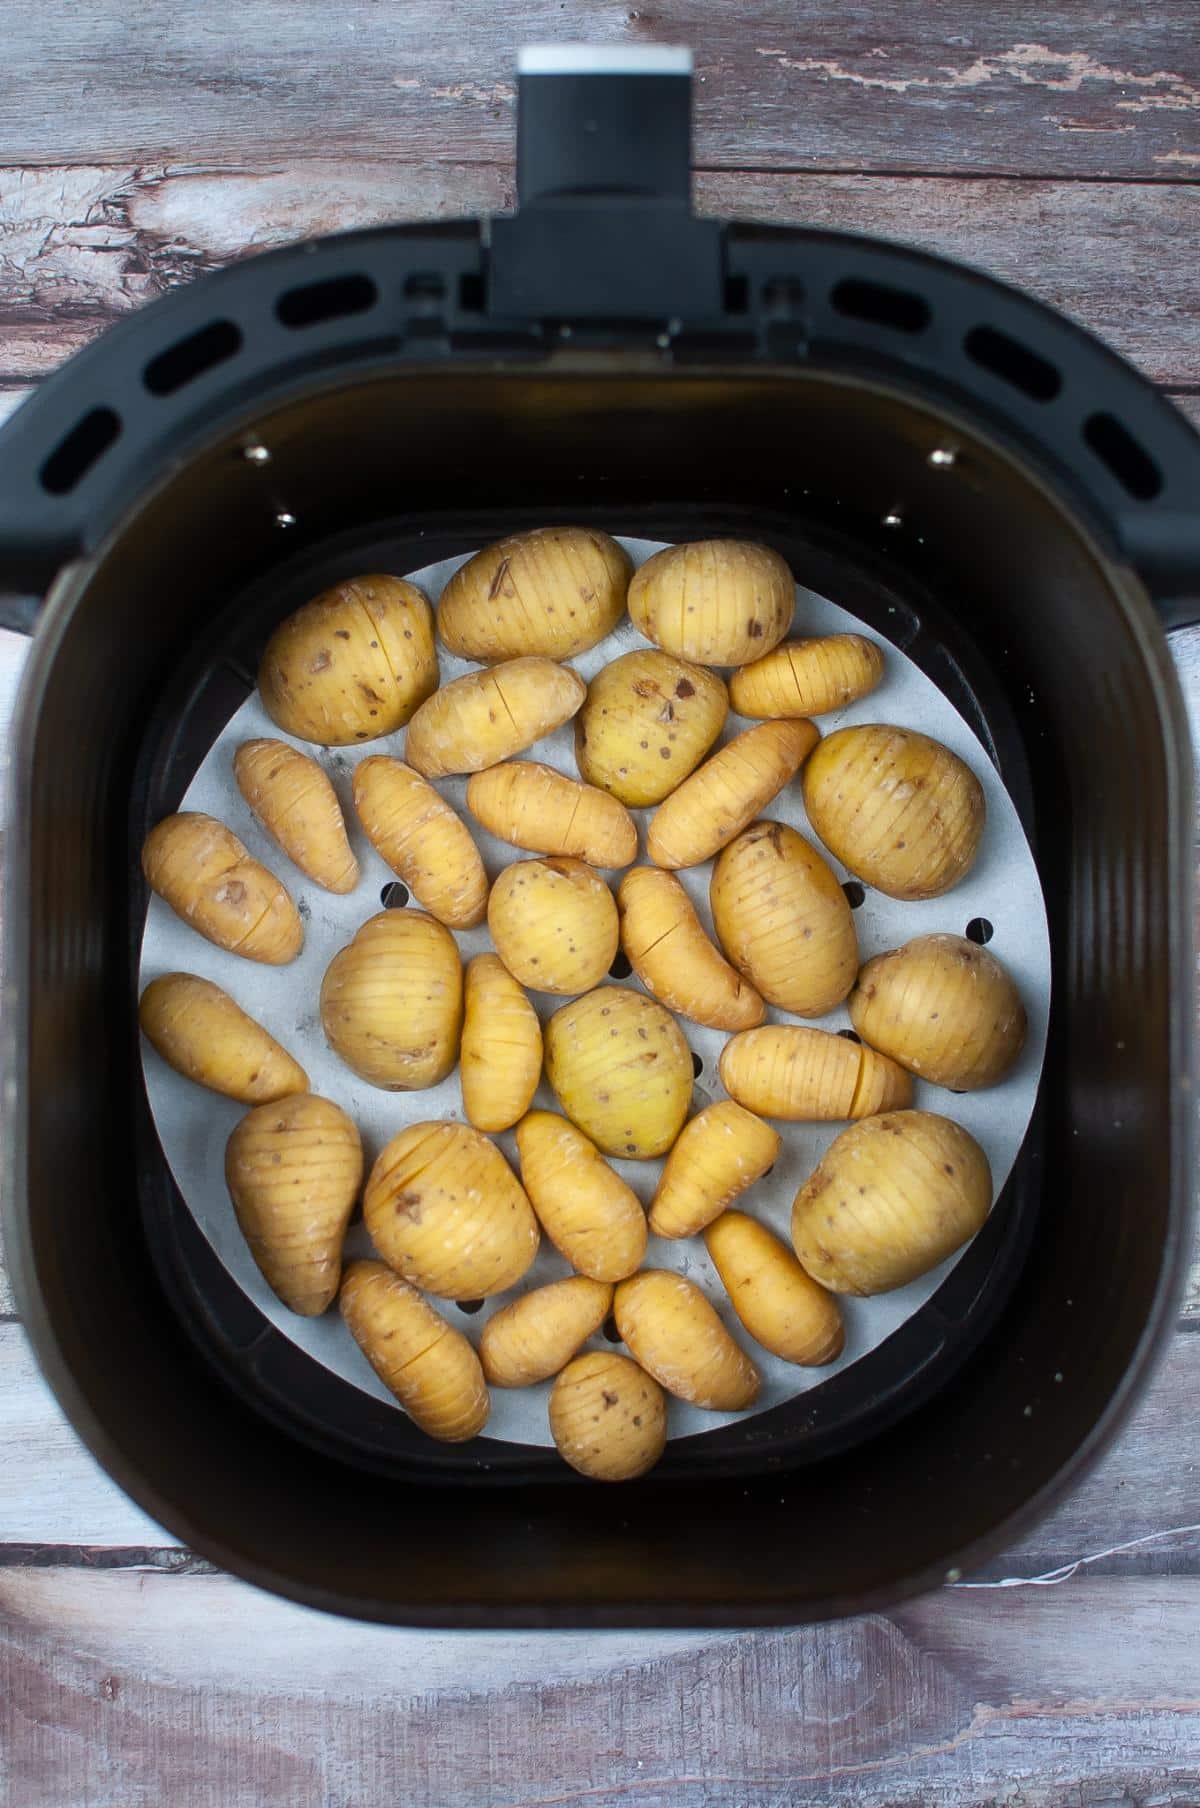 Potatoes inside the Air fryer on a wooden table.